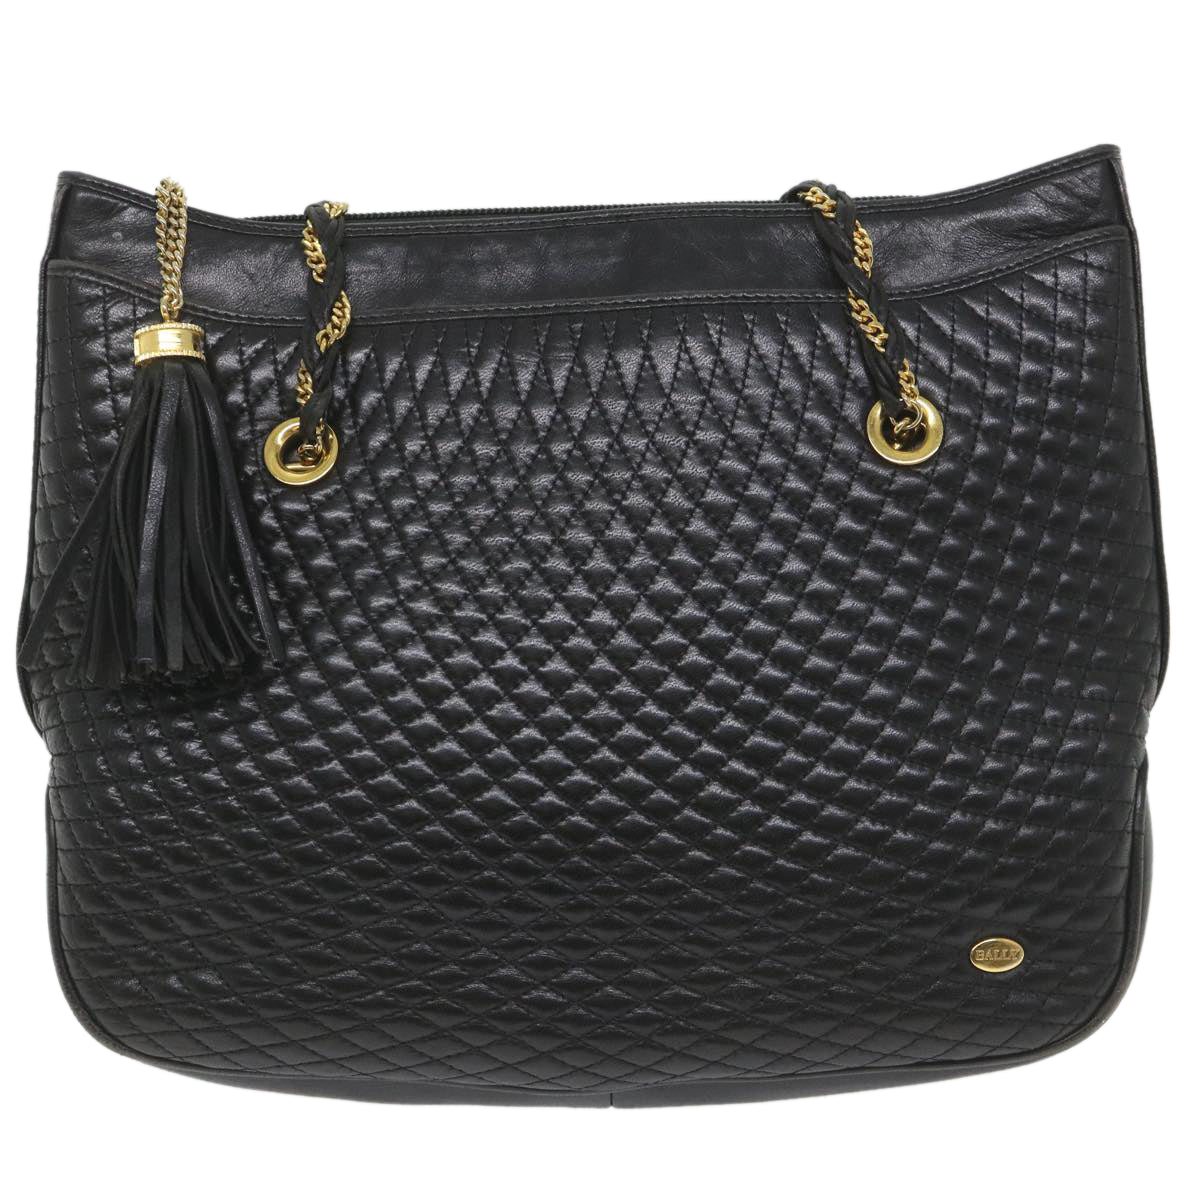 BALLY Quilted Chain Shoulder Bag Leather Black Auth bs9624 - 0